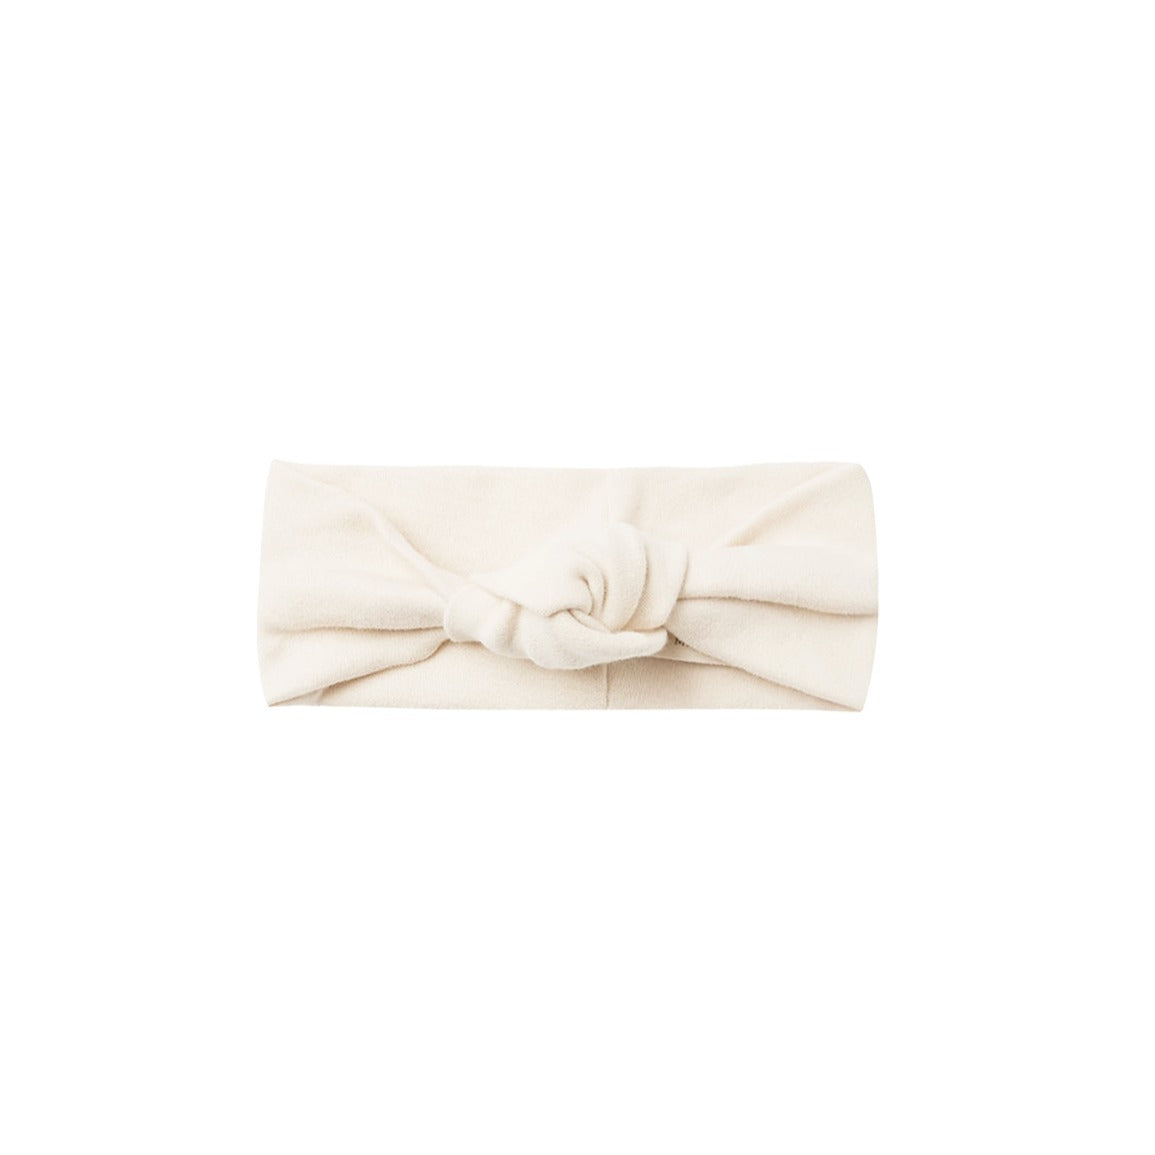 Quincy Mae Knotted Headband / Ivory